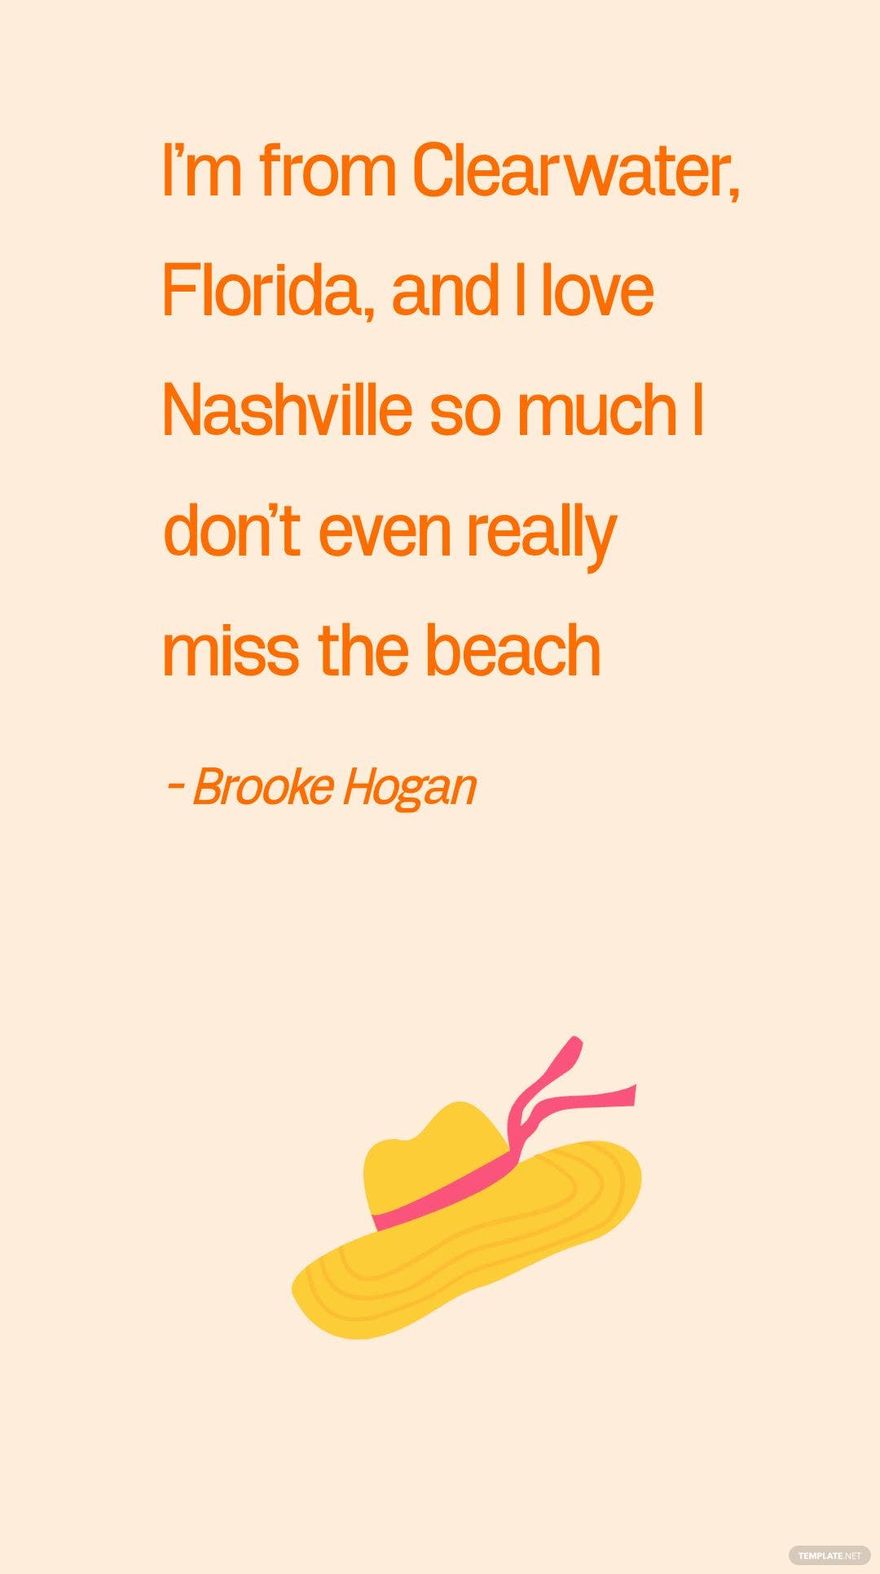 Brooke Hogan - I'm from Clearwater, Florida, and I love Nashville so much I don't even really miss the beach in JPG